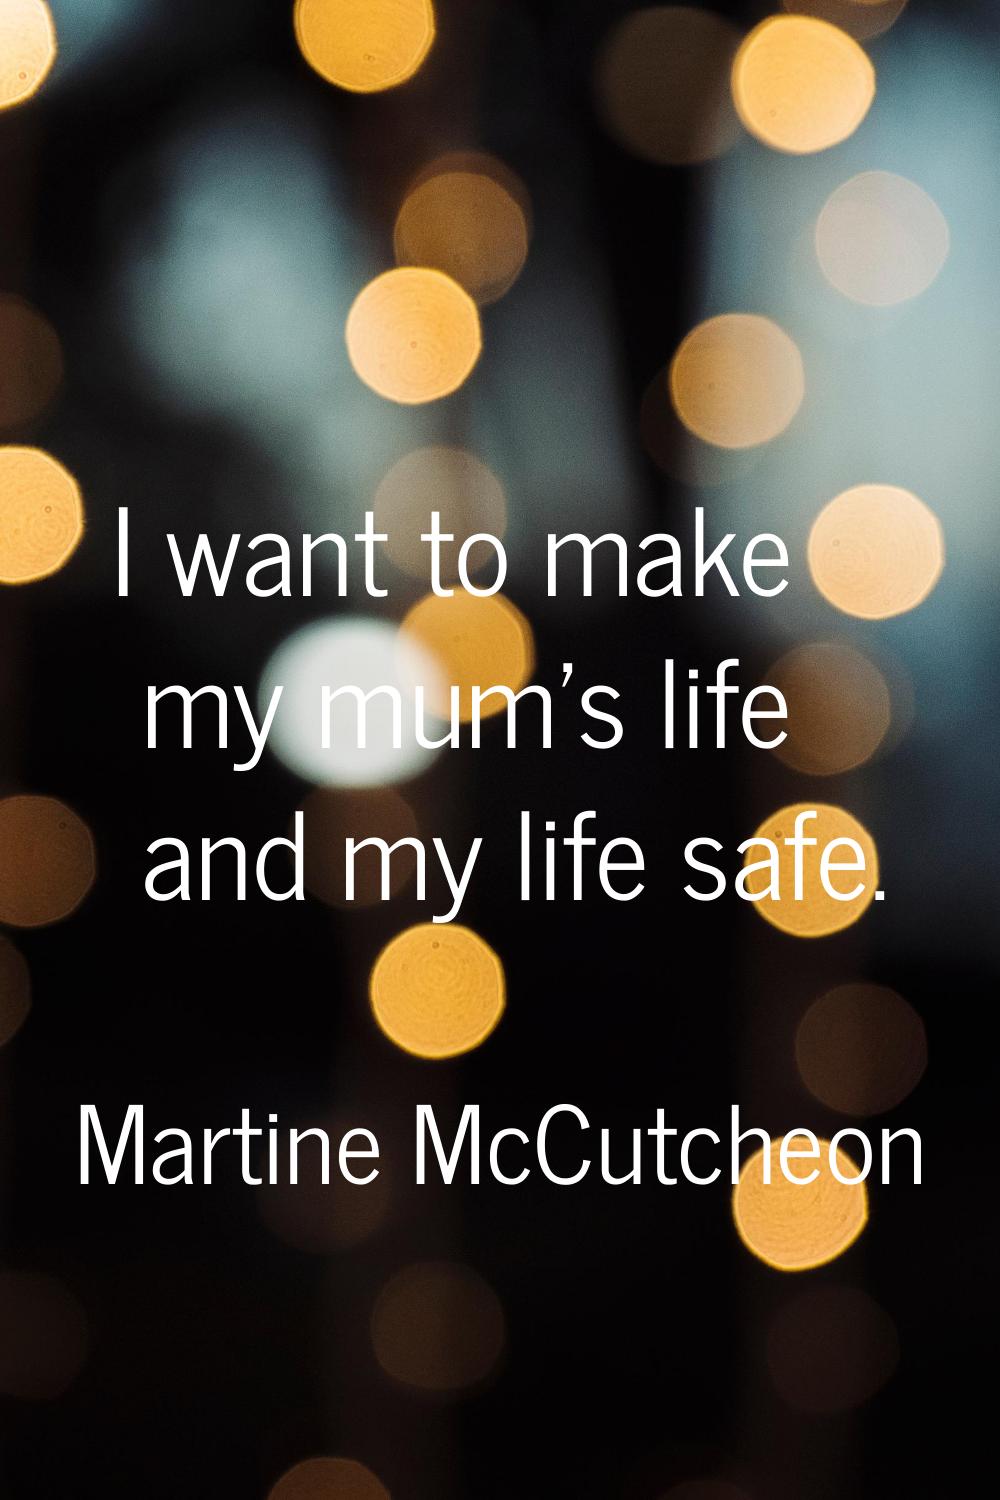 I want to make my mum's life and my life safe.